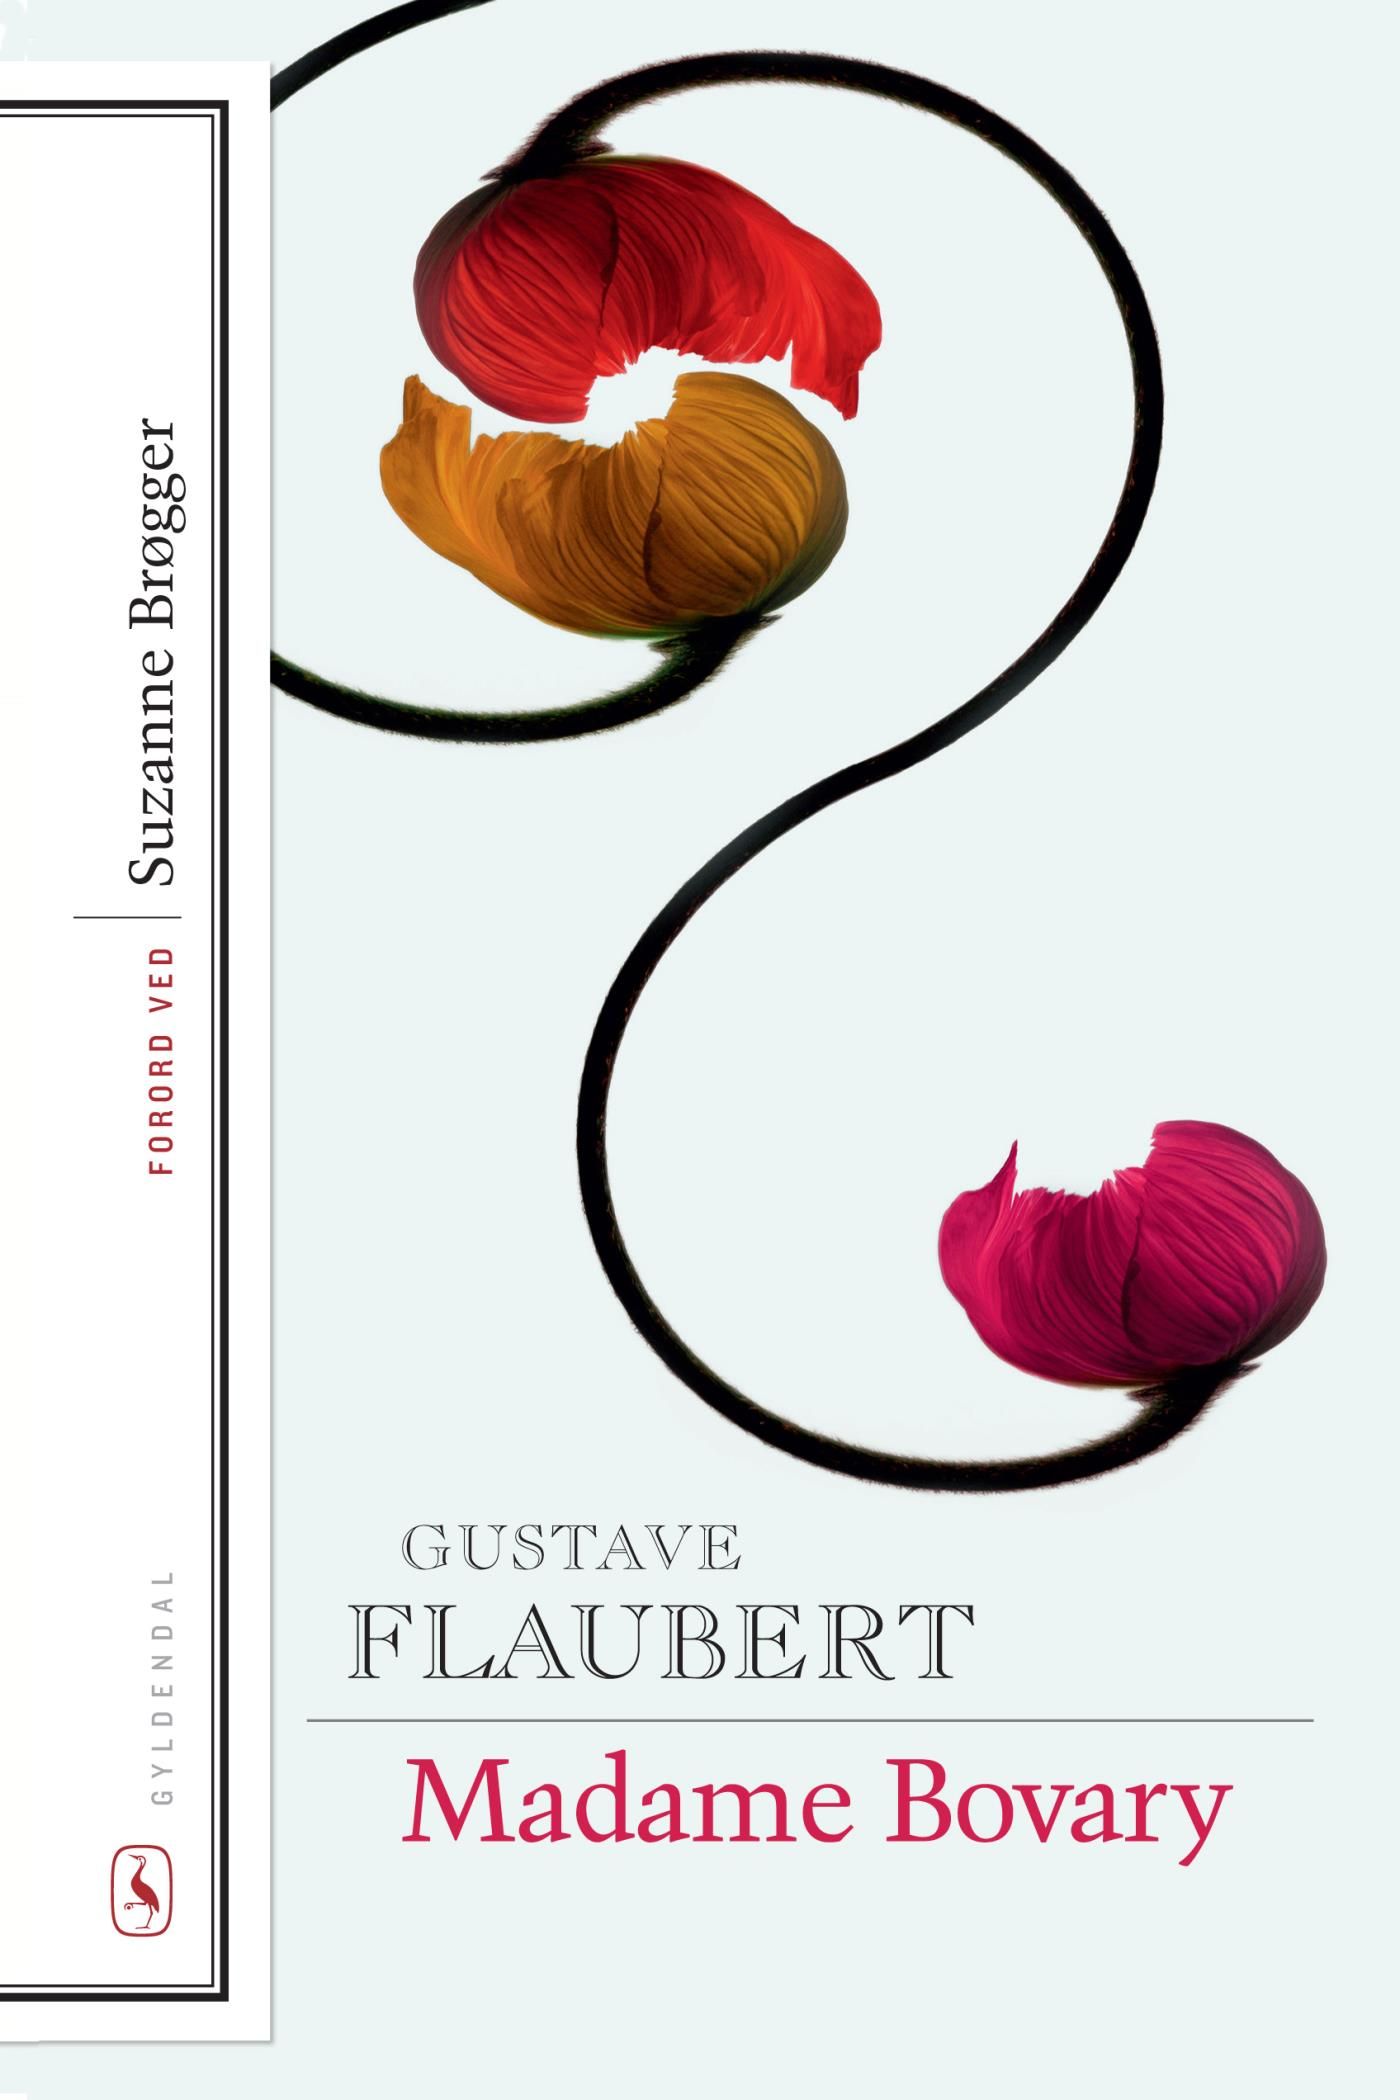 Madame Bovary, eBook by Gustave Flaubert